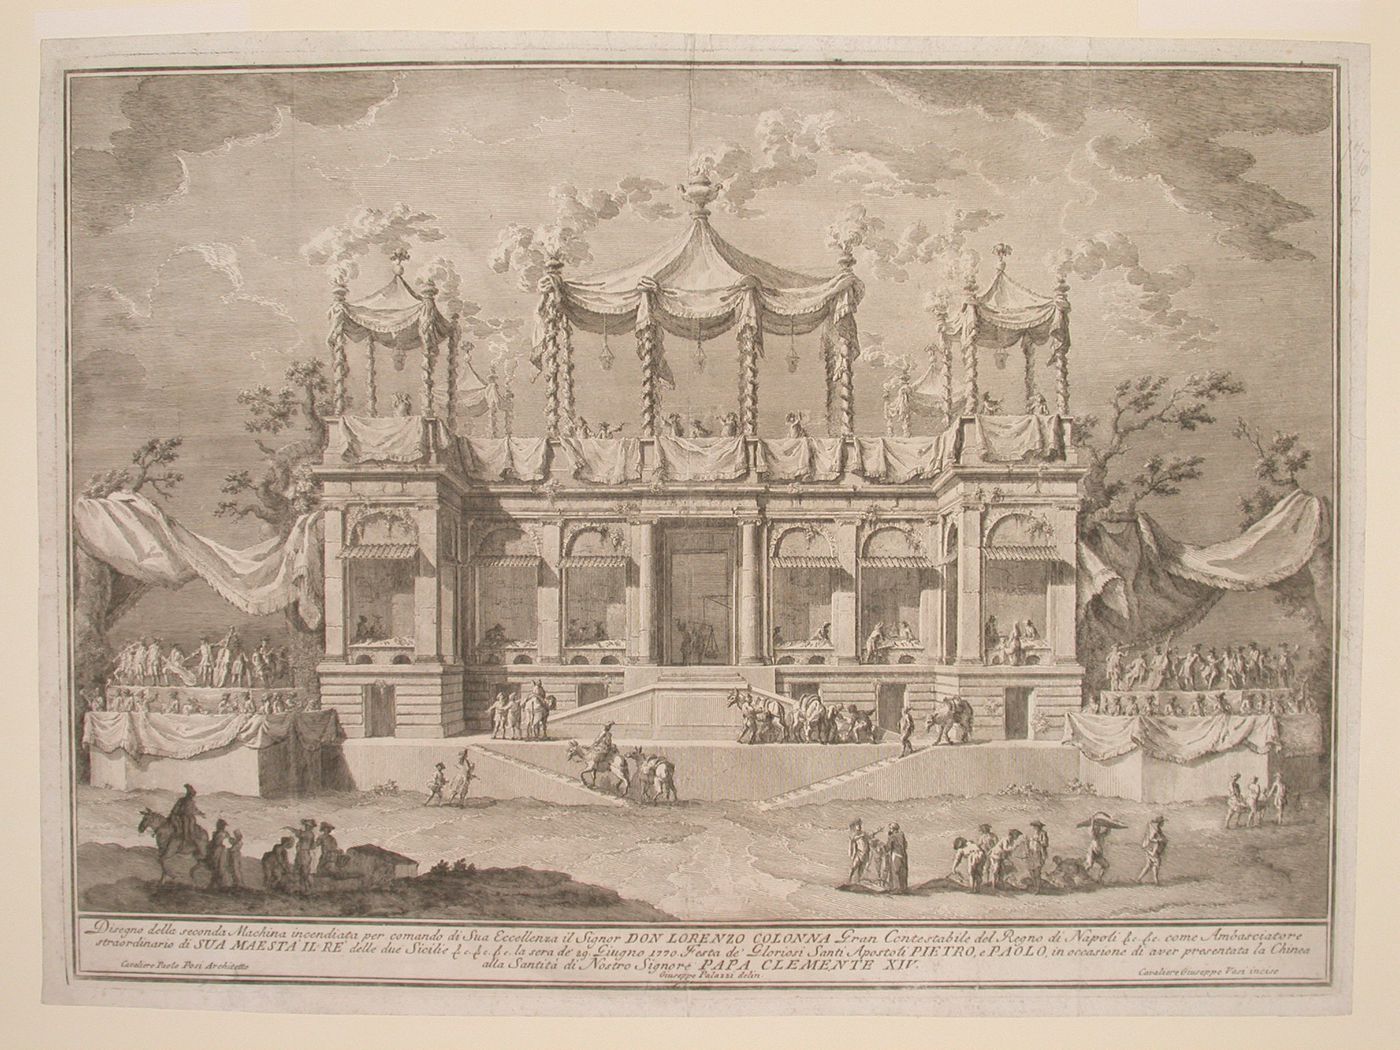 Etching of Posi's design for the "prima macchina" of 1772